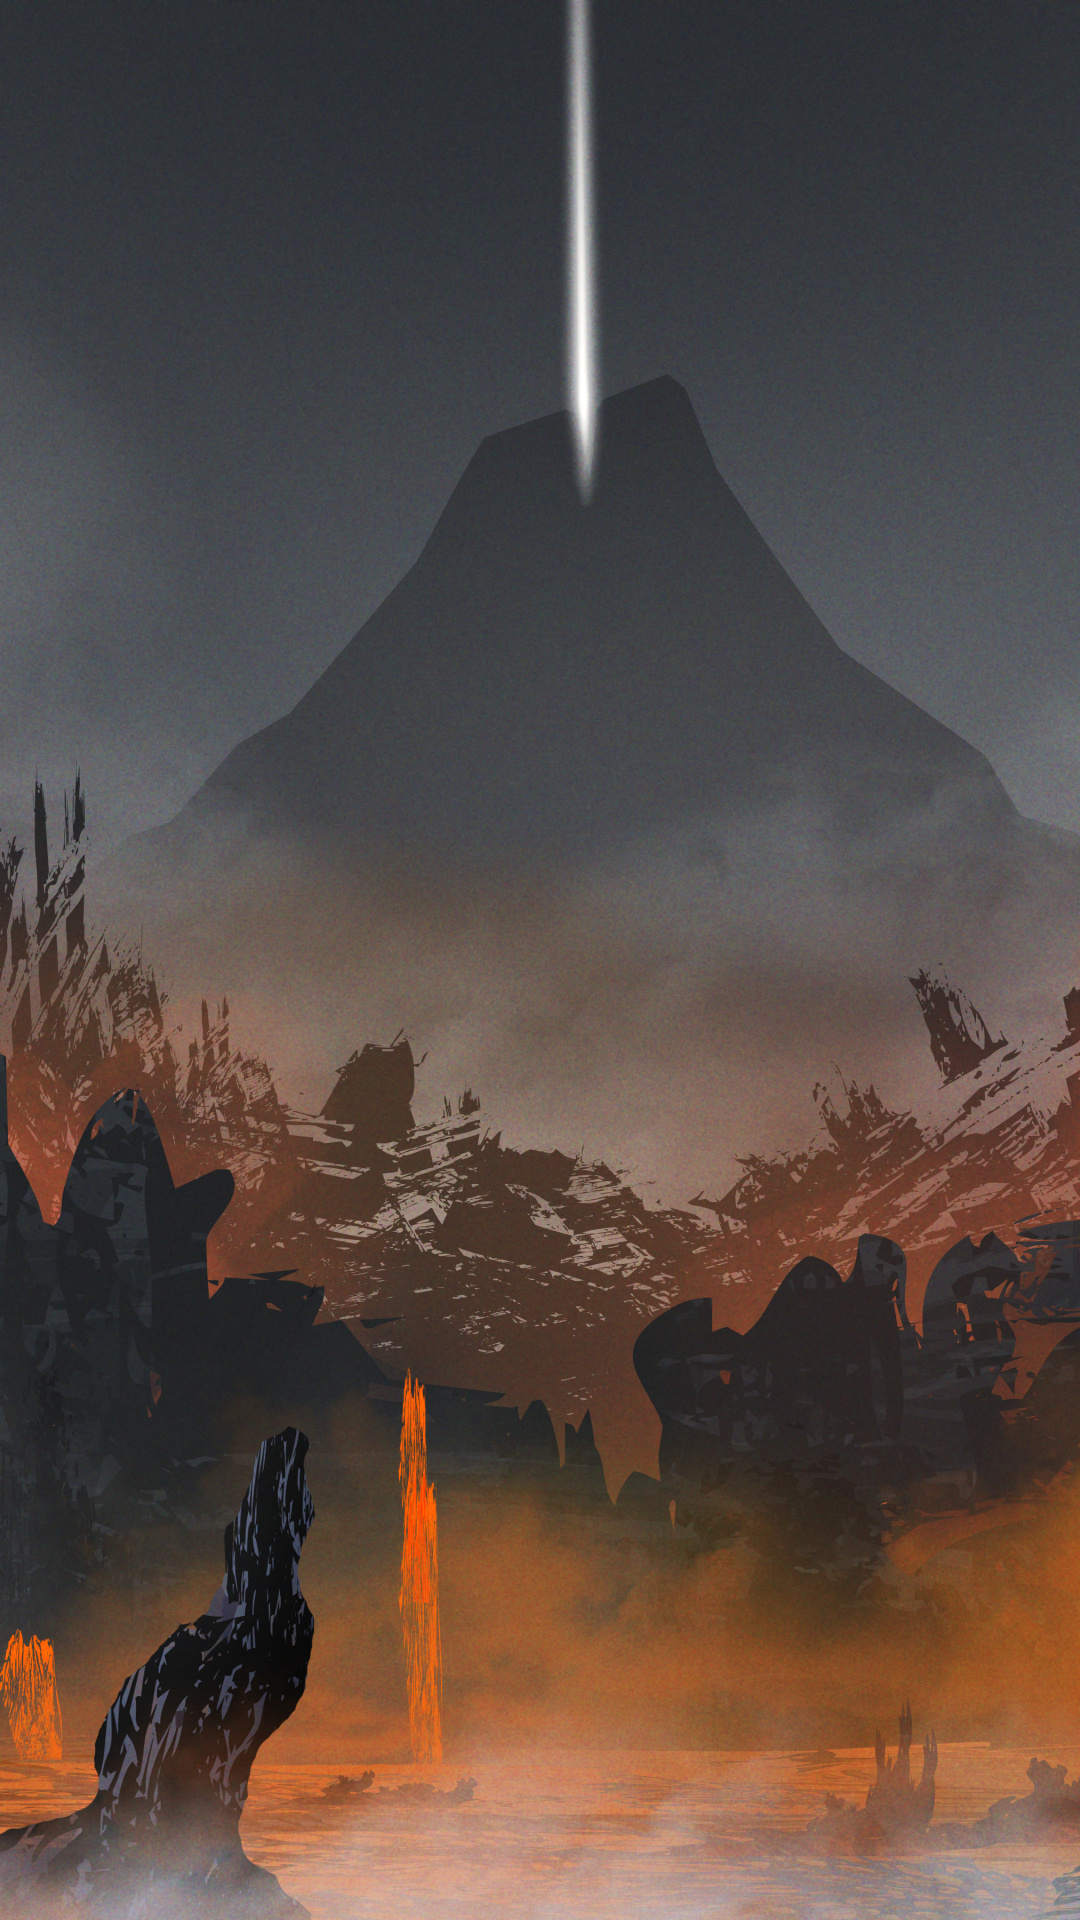 Journey game, Masterpiece of gaming, Emotional journey, Breathtaking visuals, 1080x1920 Full HD Handy